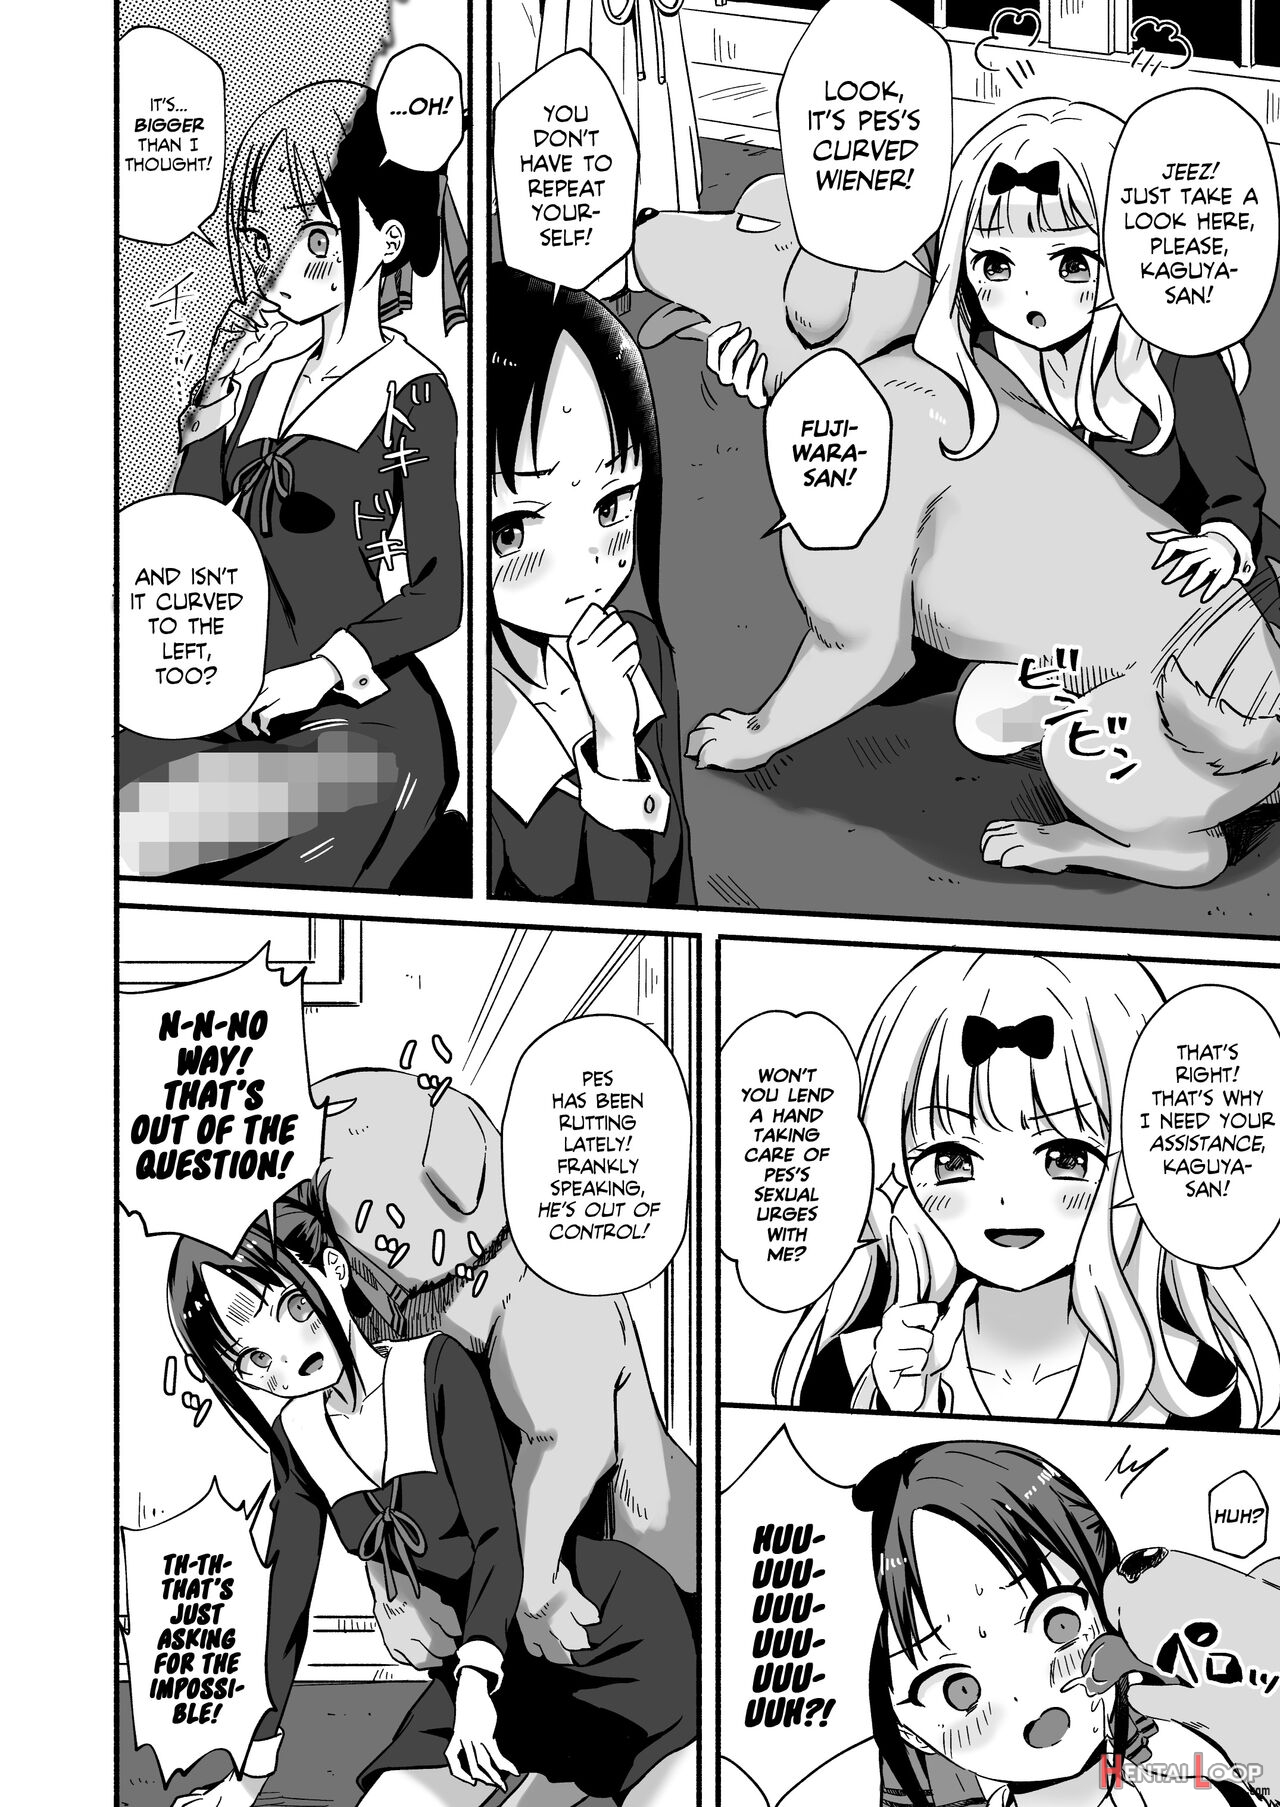 Kaguya-san Takes Care Of Pes's Sexual Urges! page 4